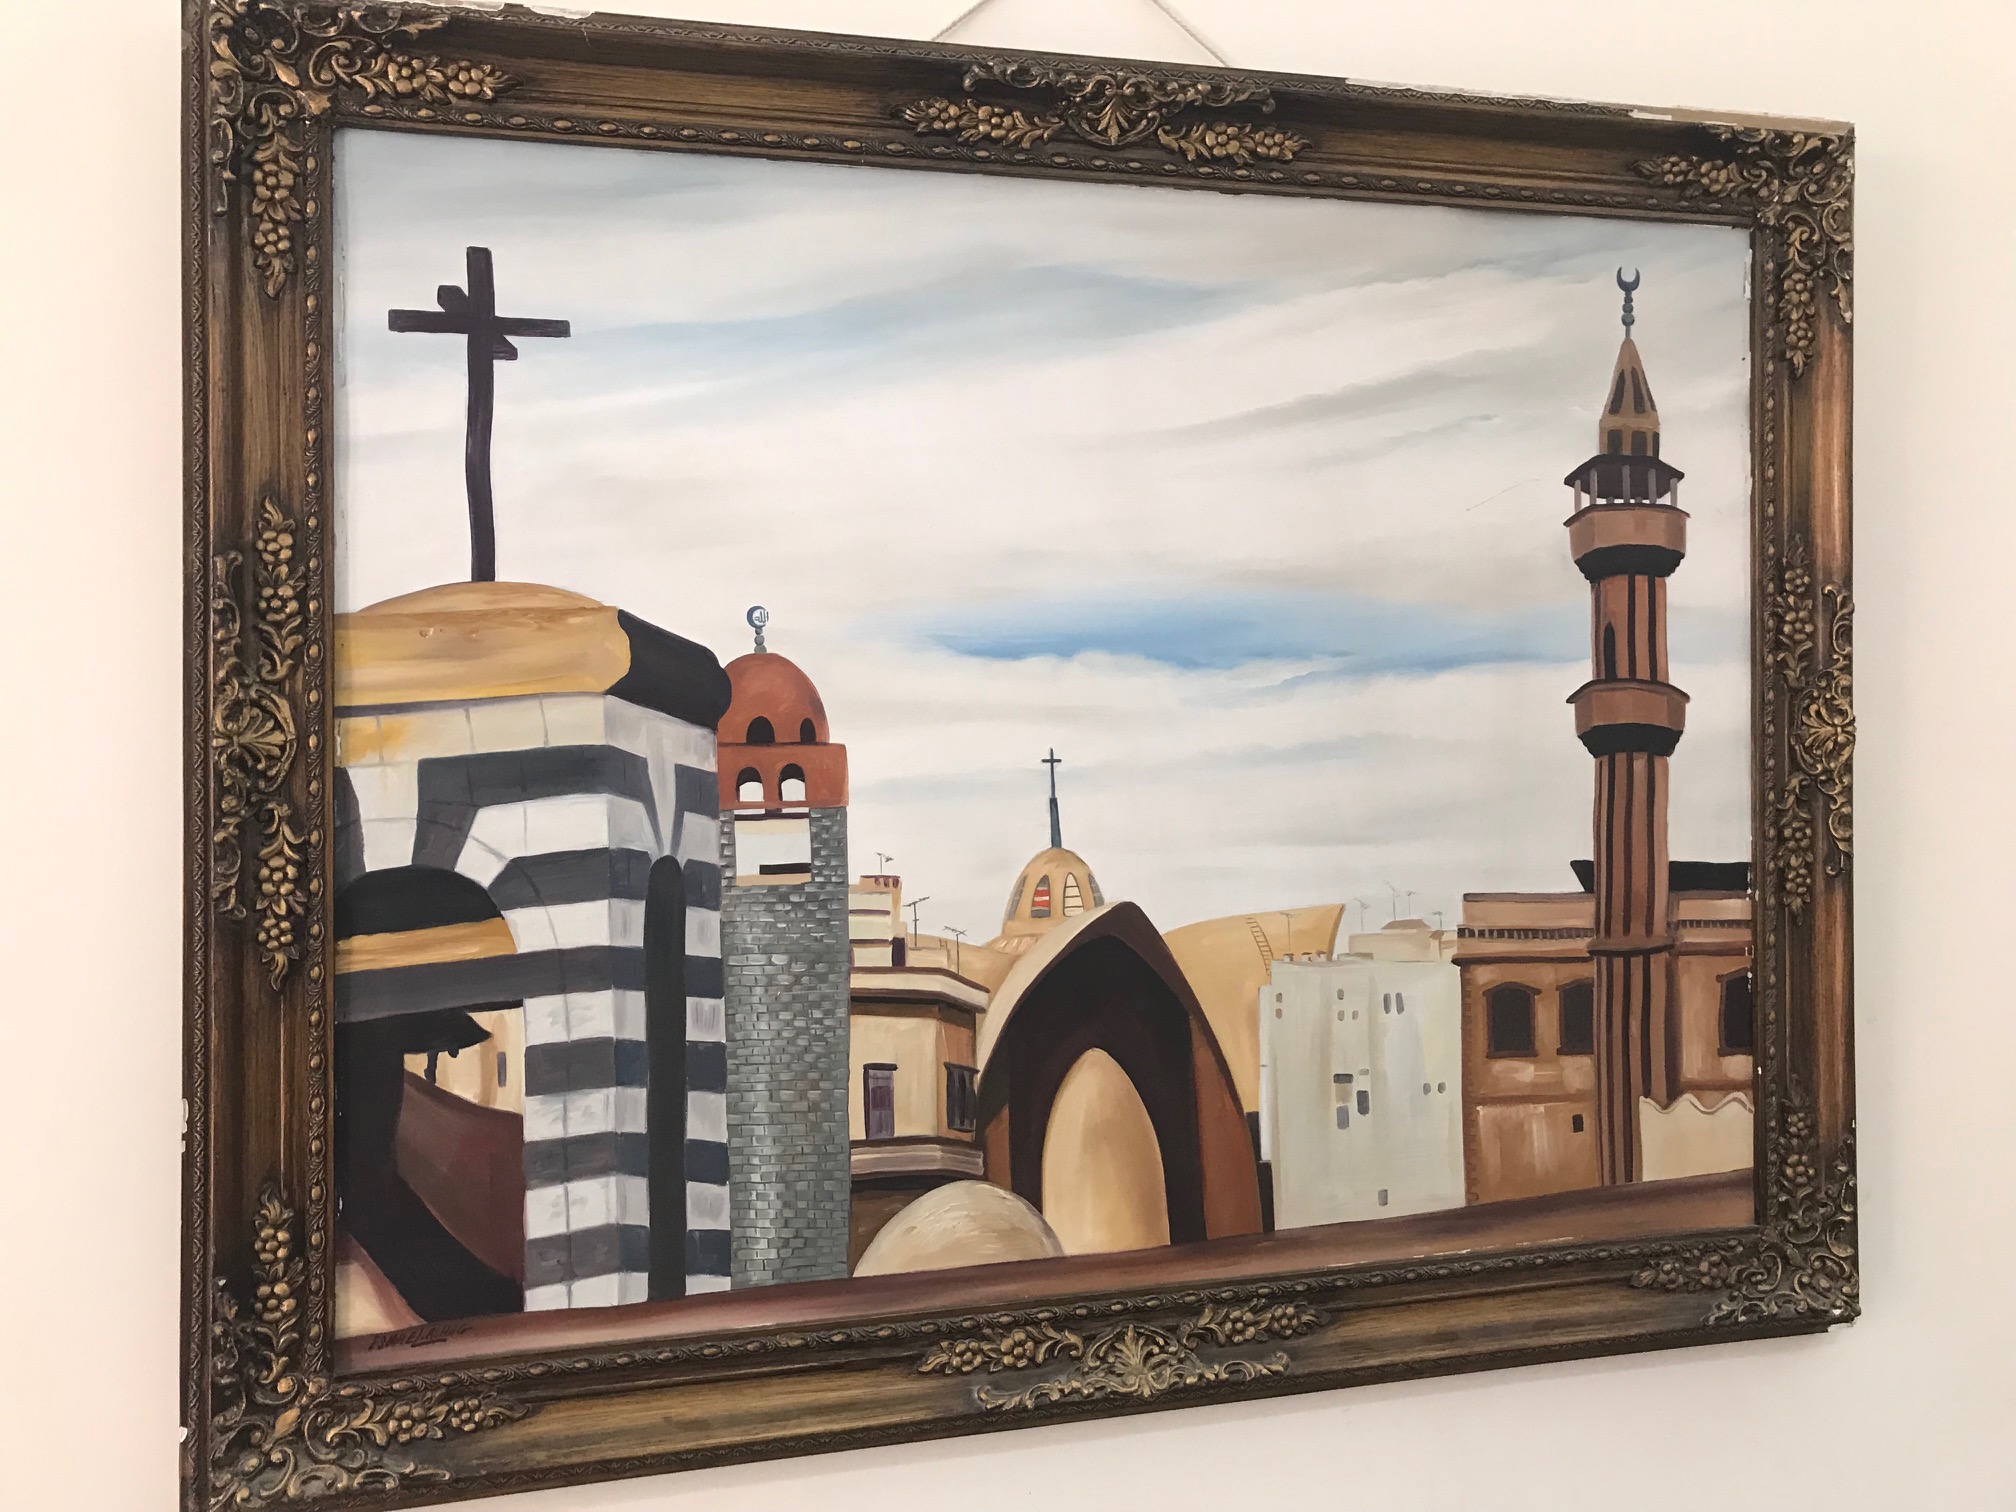  Painting in the Homs church fellowship hall showing the Presbyterian church bell tower, Greek Catholic church, and two mosques 